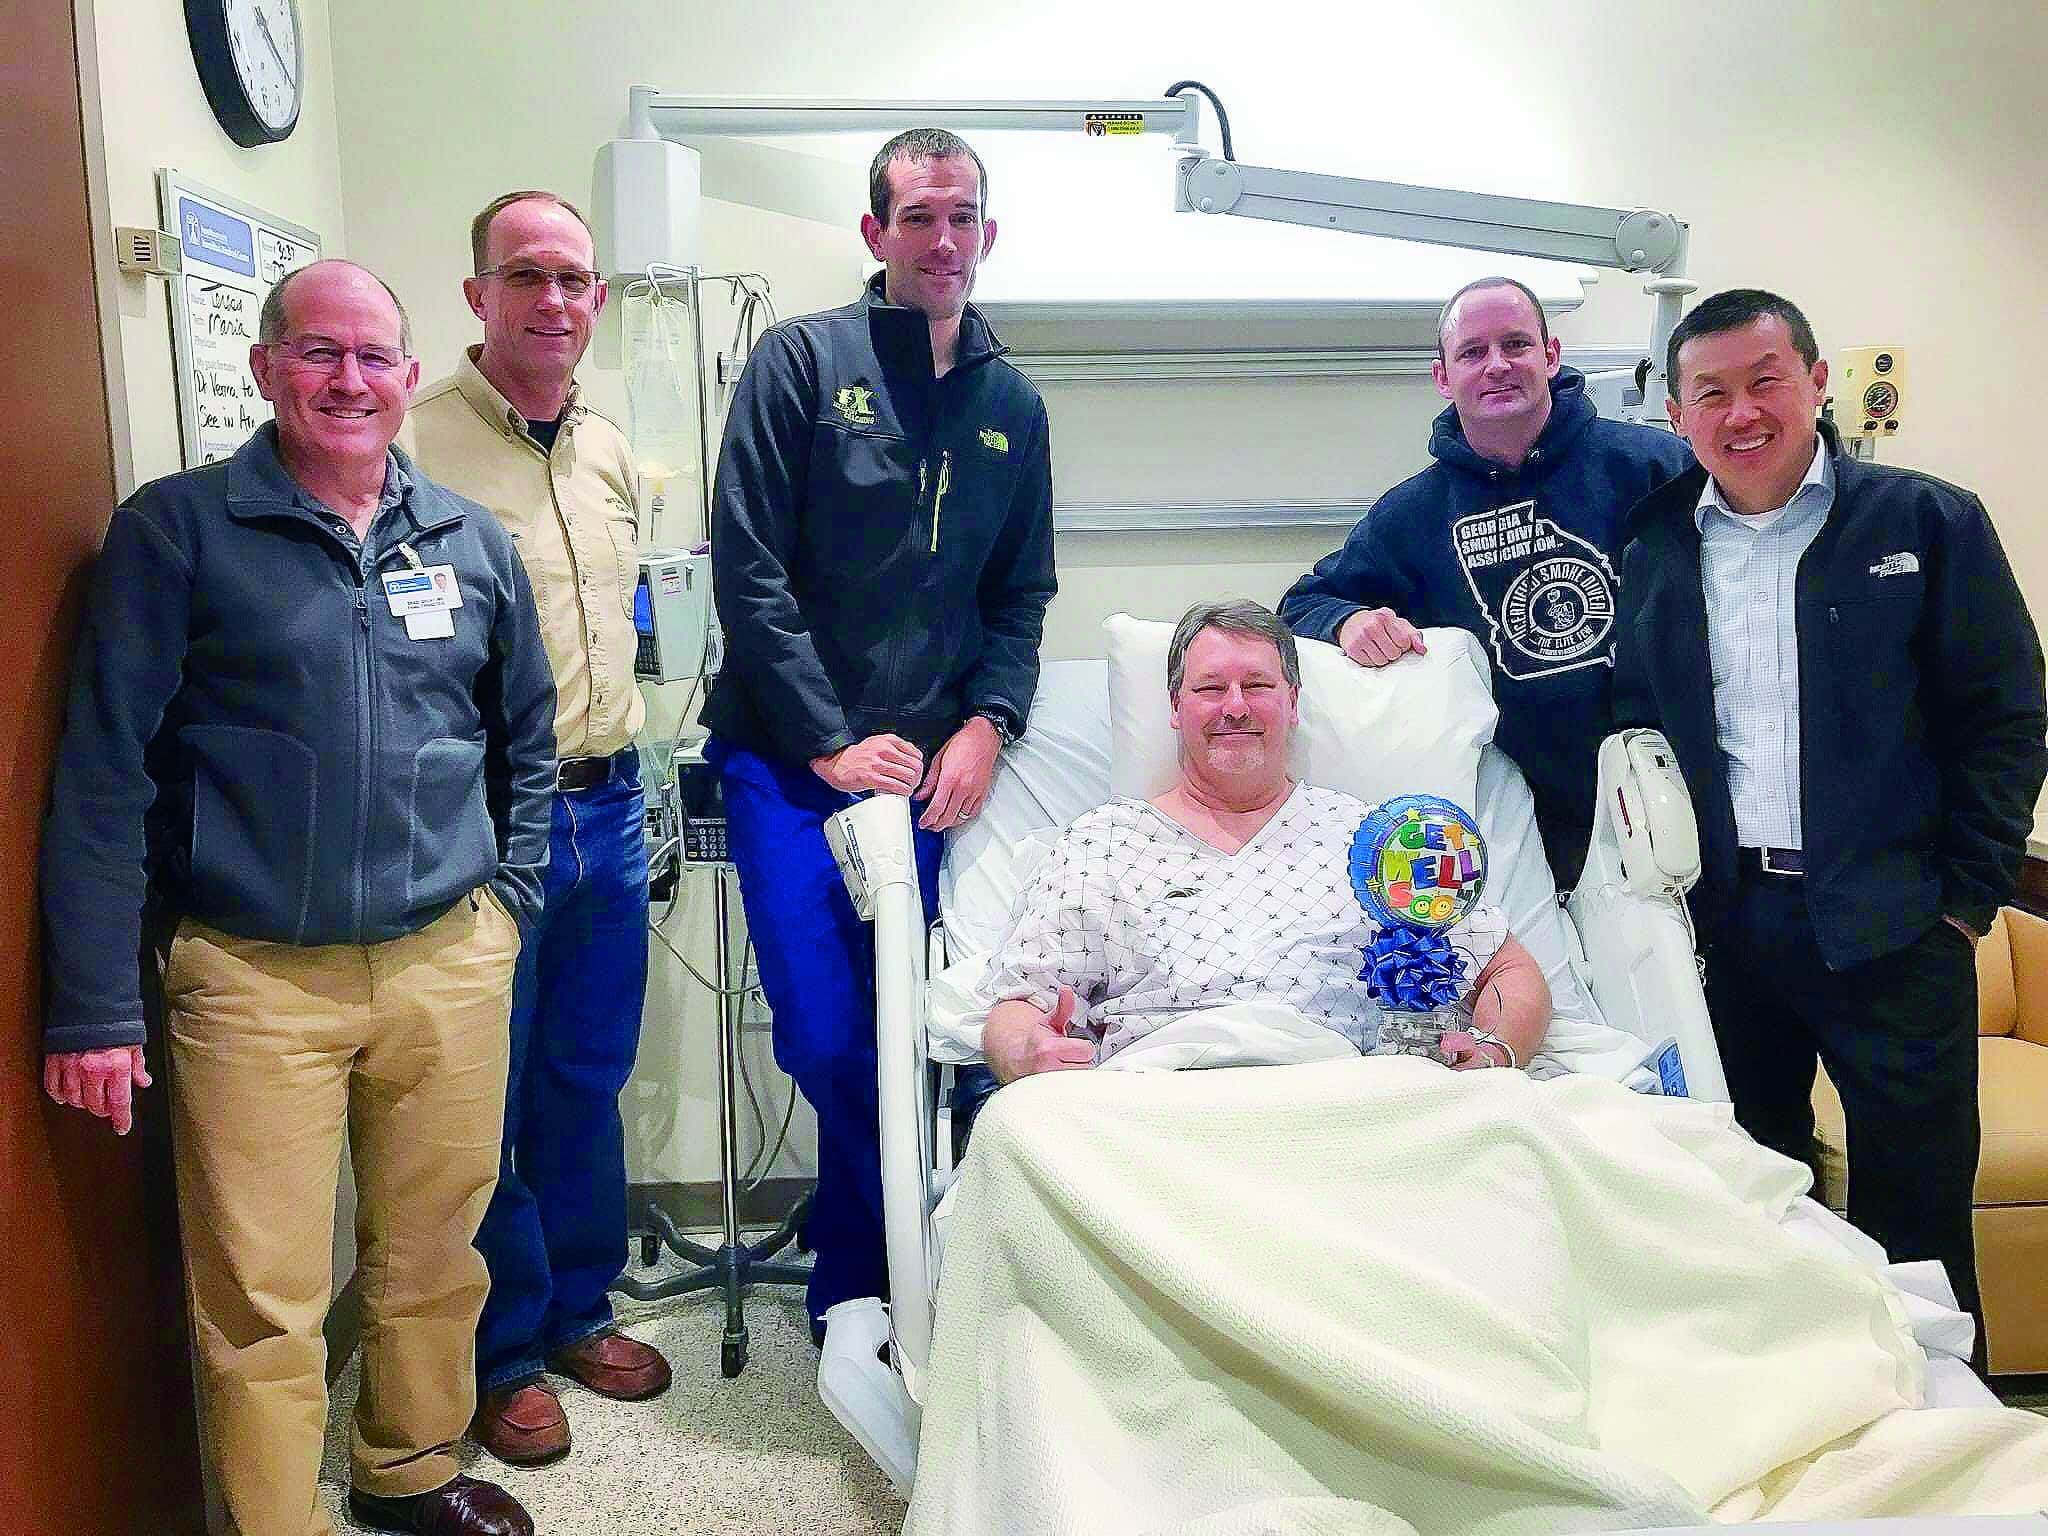 The five cyclists visit the man they saved, now safe in the hospital. Nurse James DeLong is the third behind the patient.